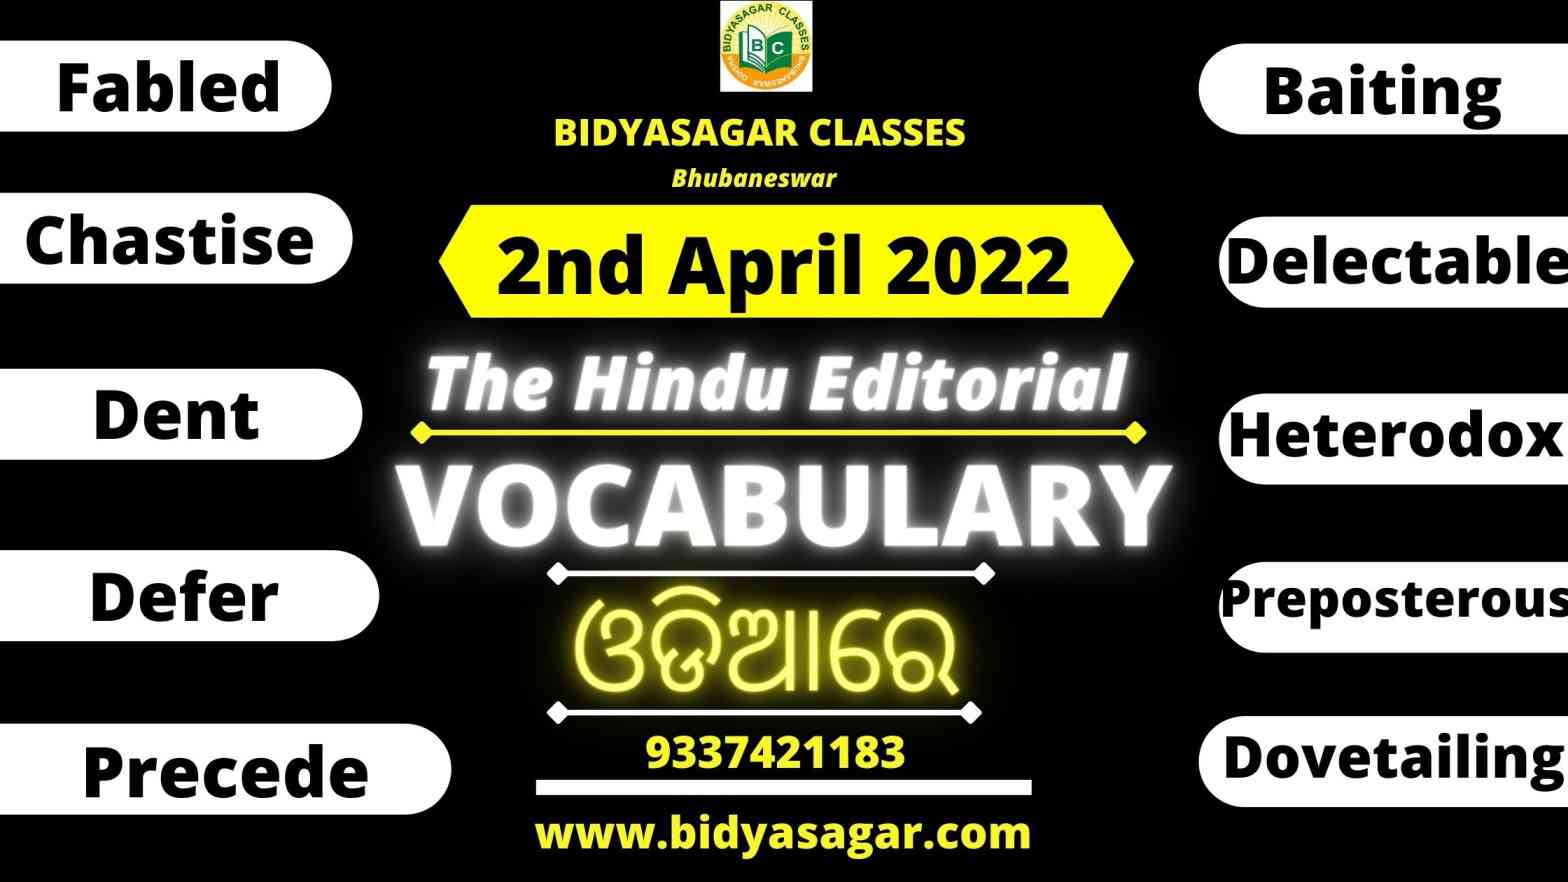 The Hindu Editorial Vocabulary of 2nd April 2022